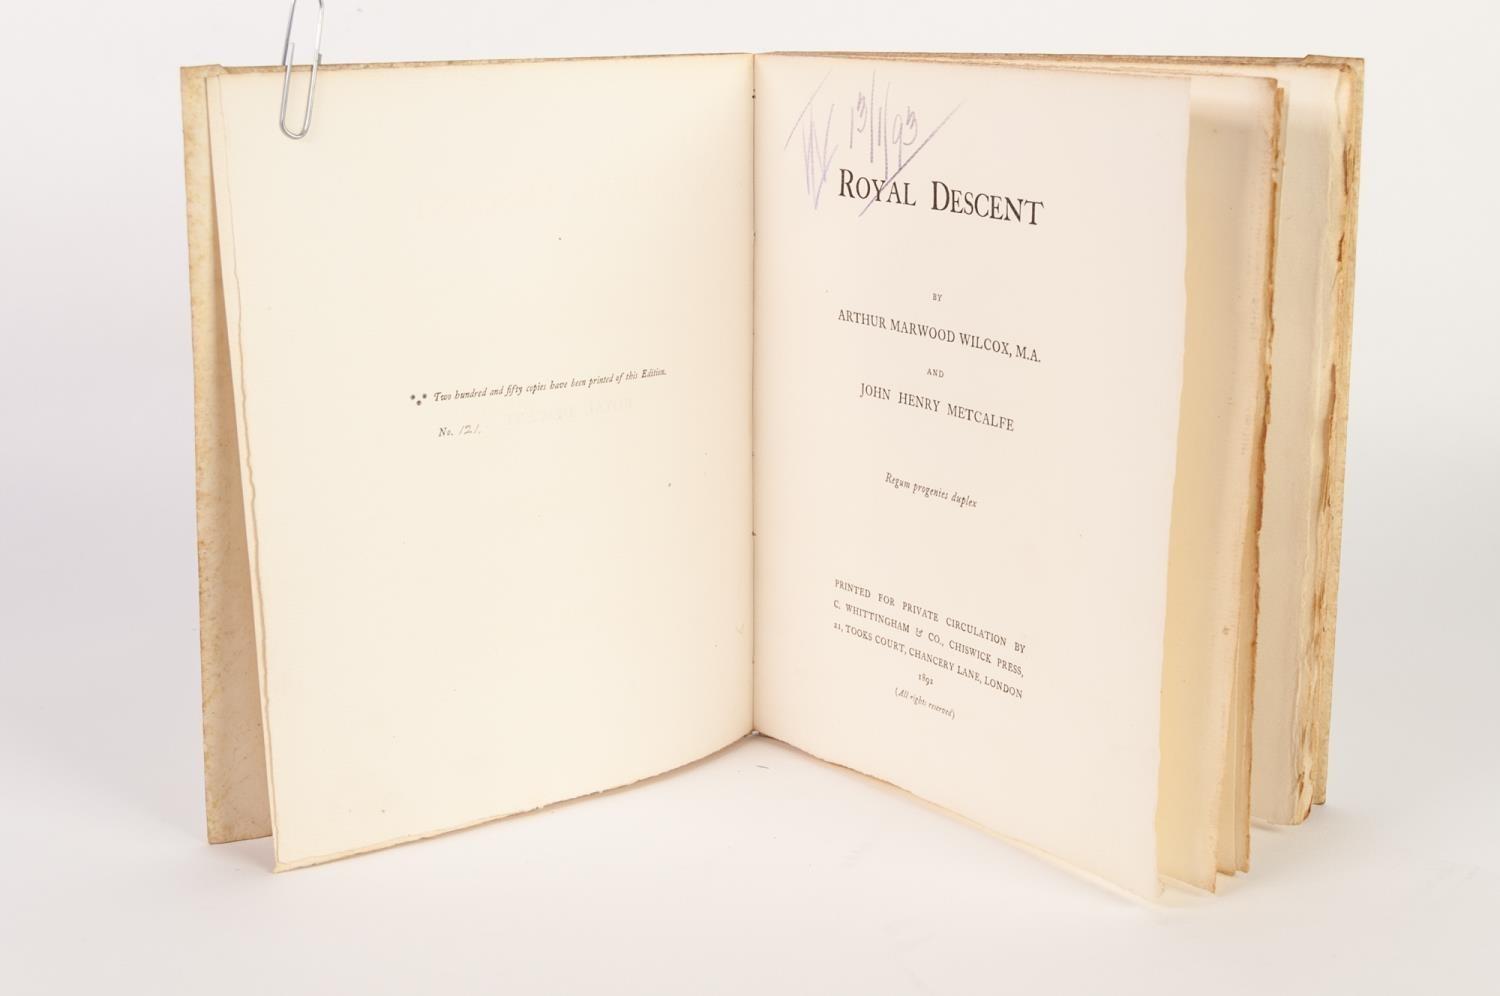 Arthur Marwood Wilcox and John Henry Metcalf- Royal Decent, printed for private circulation 1892. - Image 2 of 2